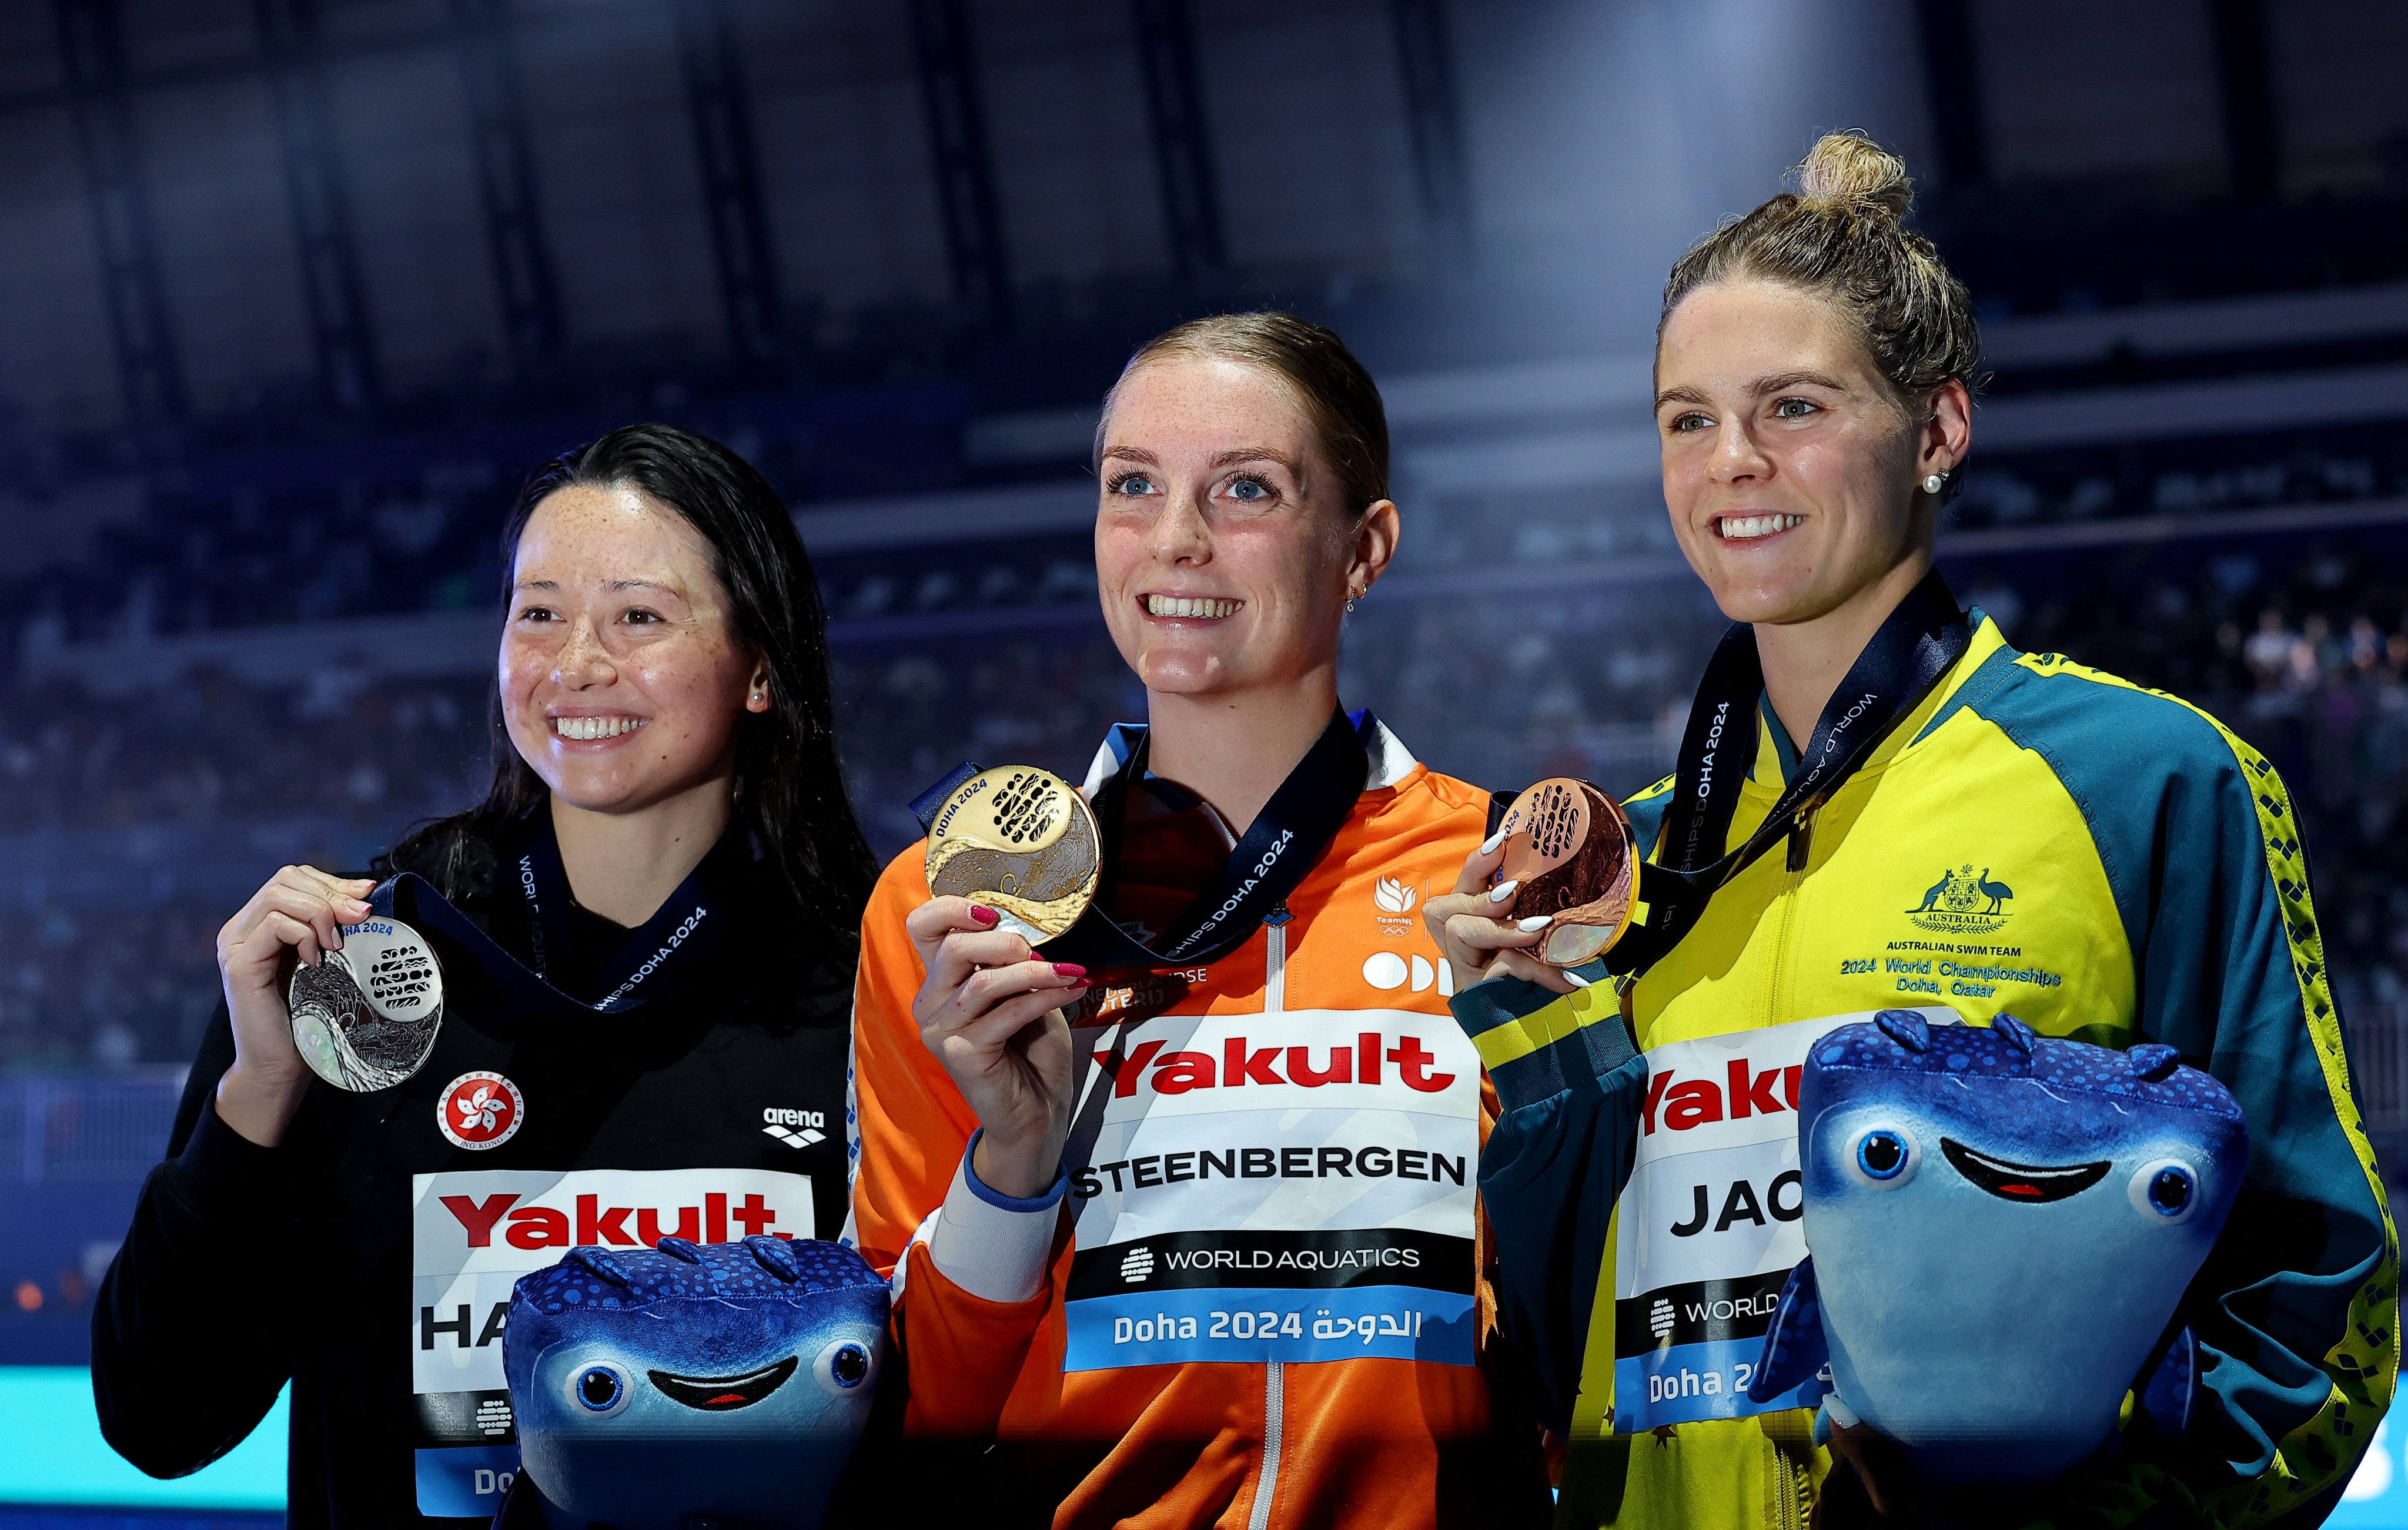 Siobhan Haughey (left) on the podium alongside Marrit Steenbergen (centre) and Shayna Jack. Photo: Reuters